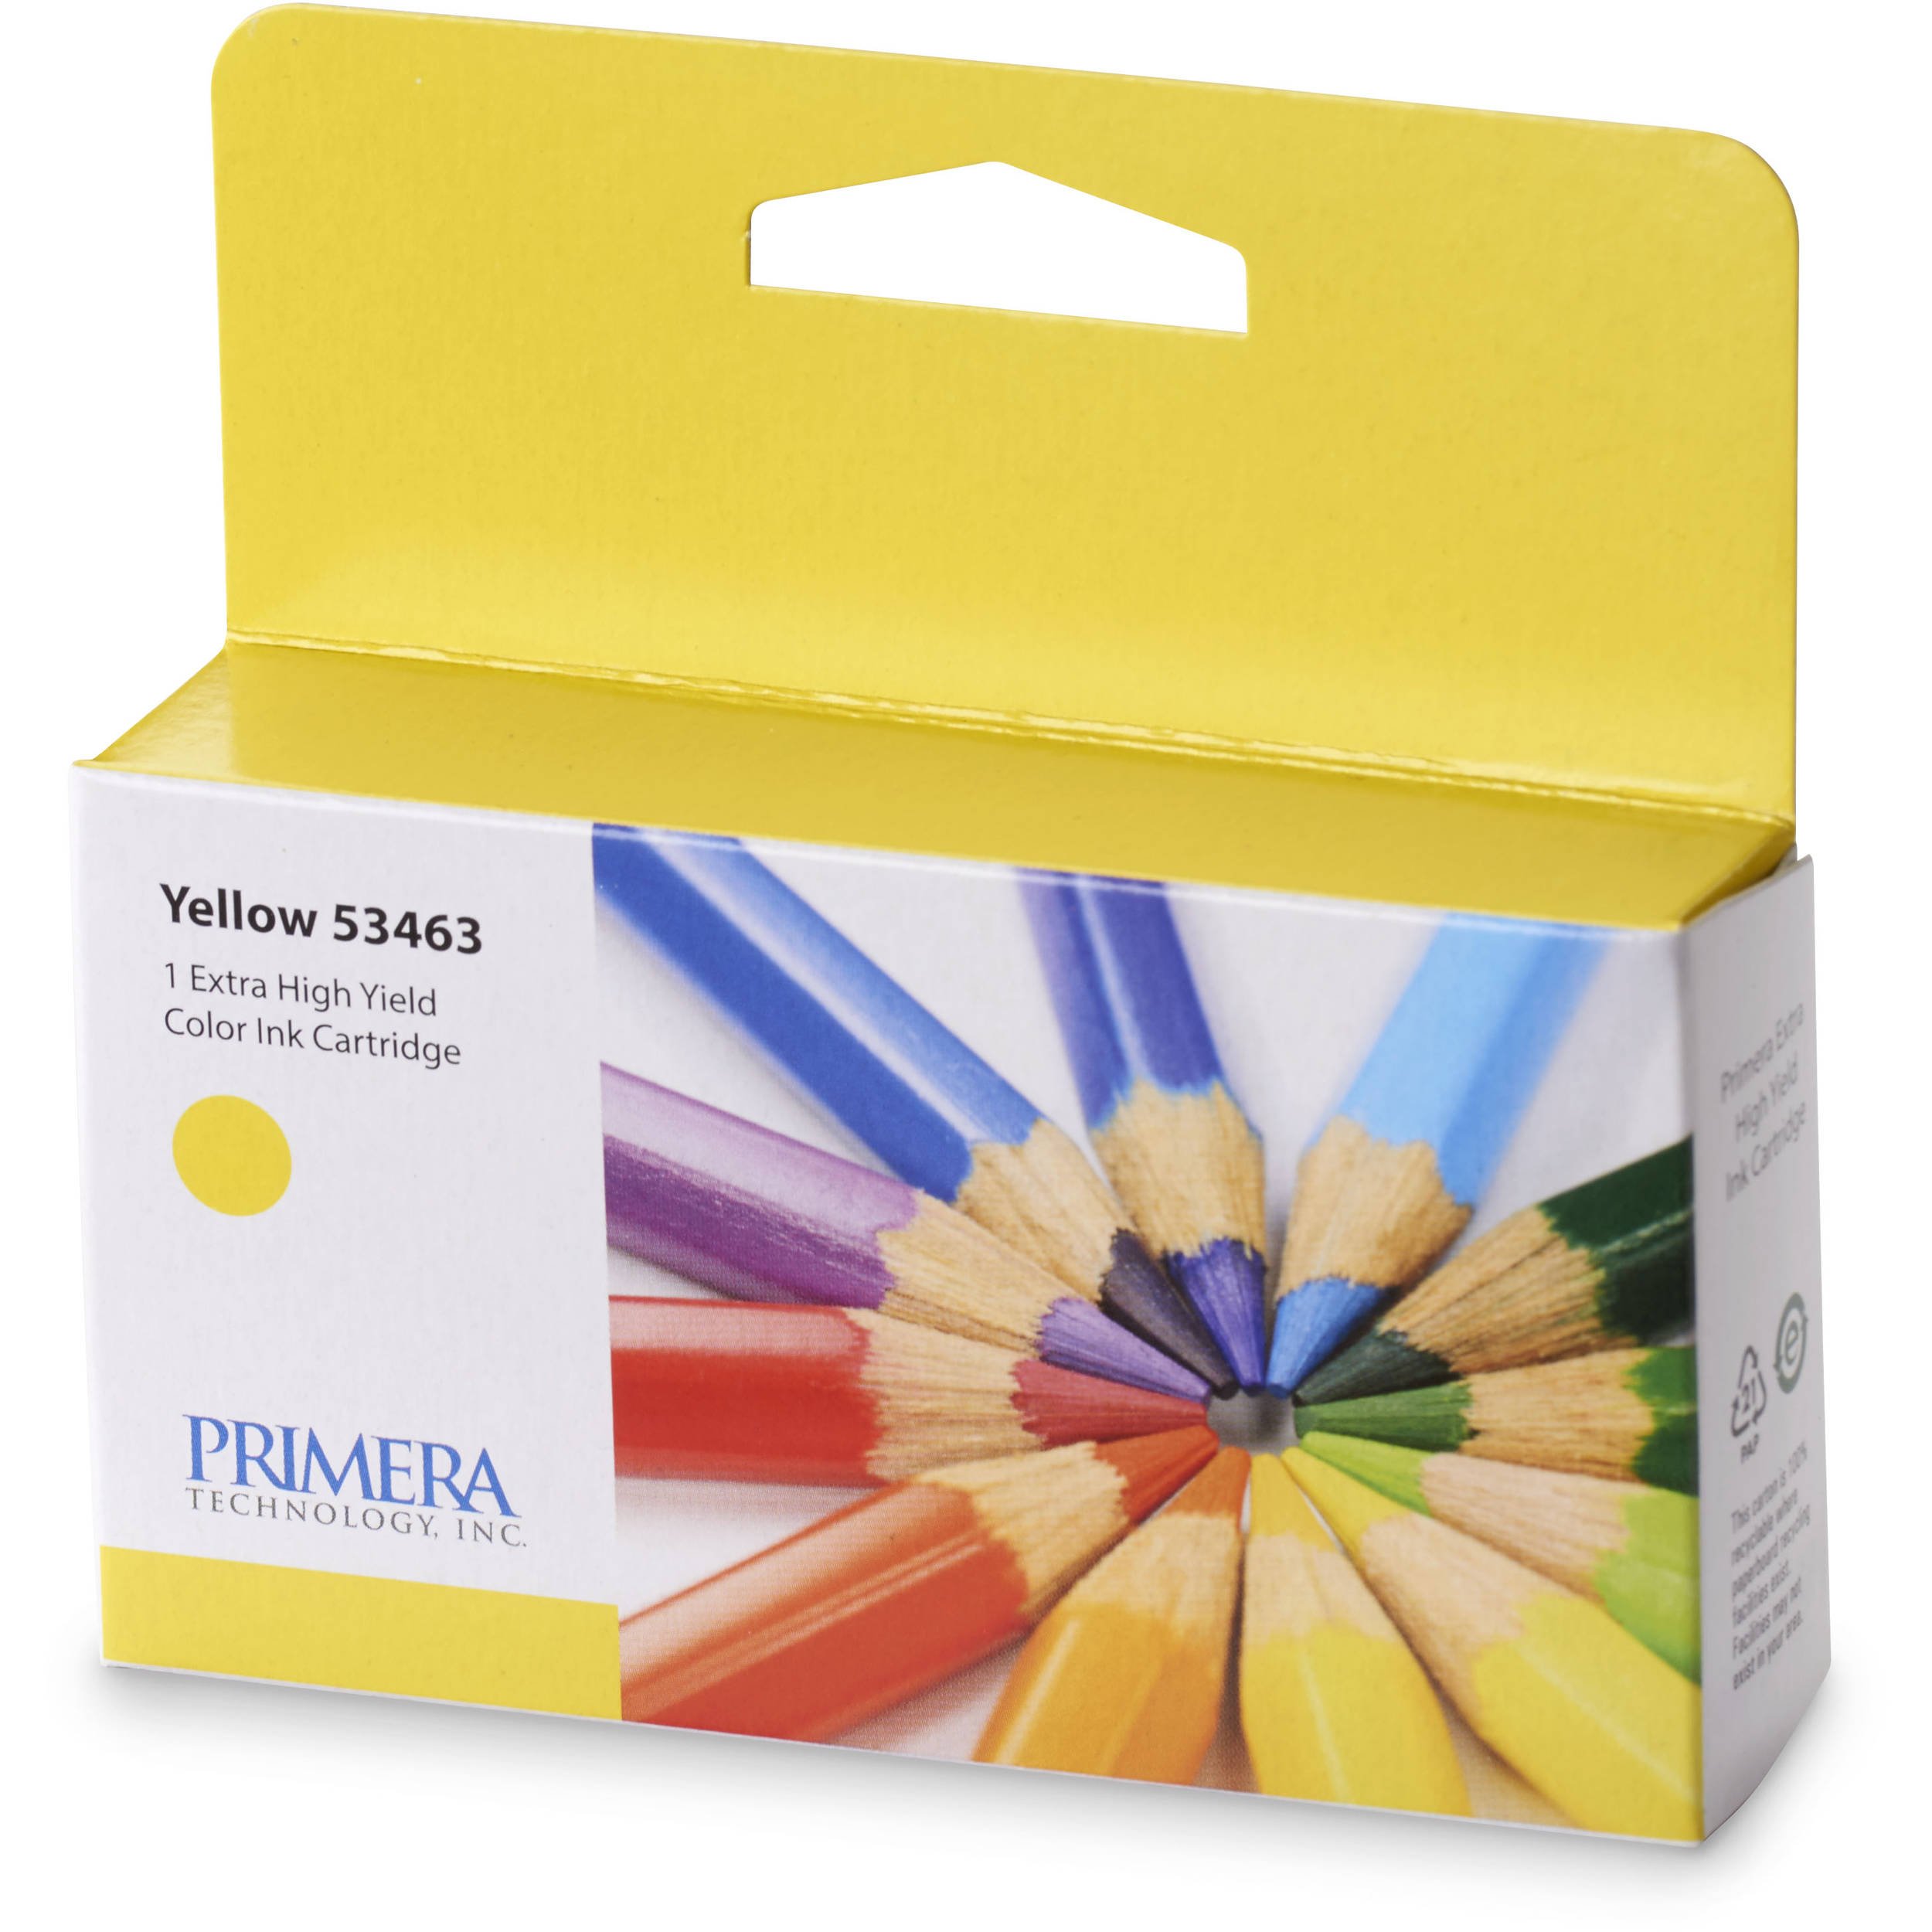 Yellow Pigmented Ink Tank Dtm Ink And Consumables 053463 665188534633